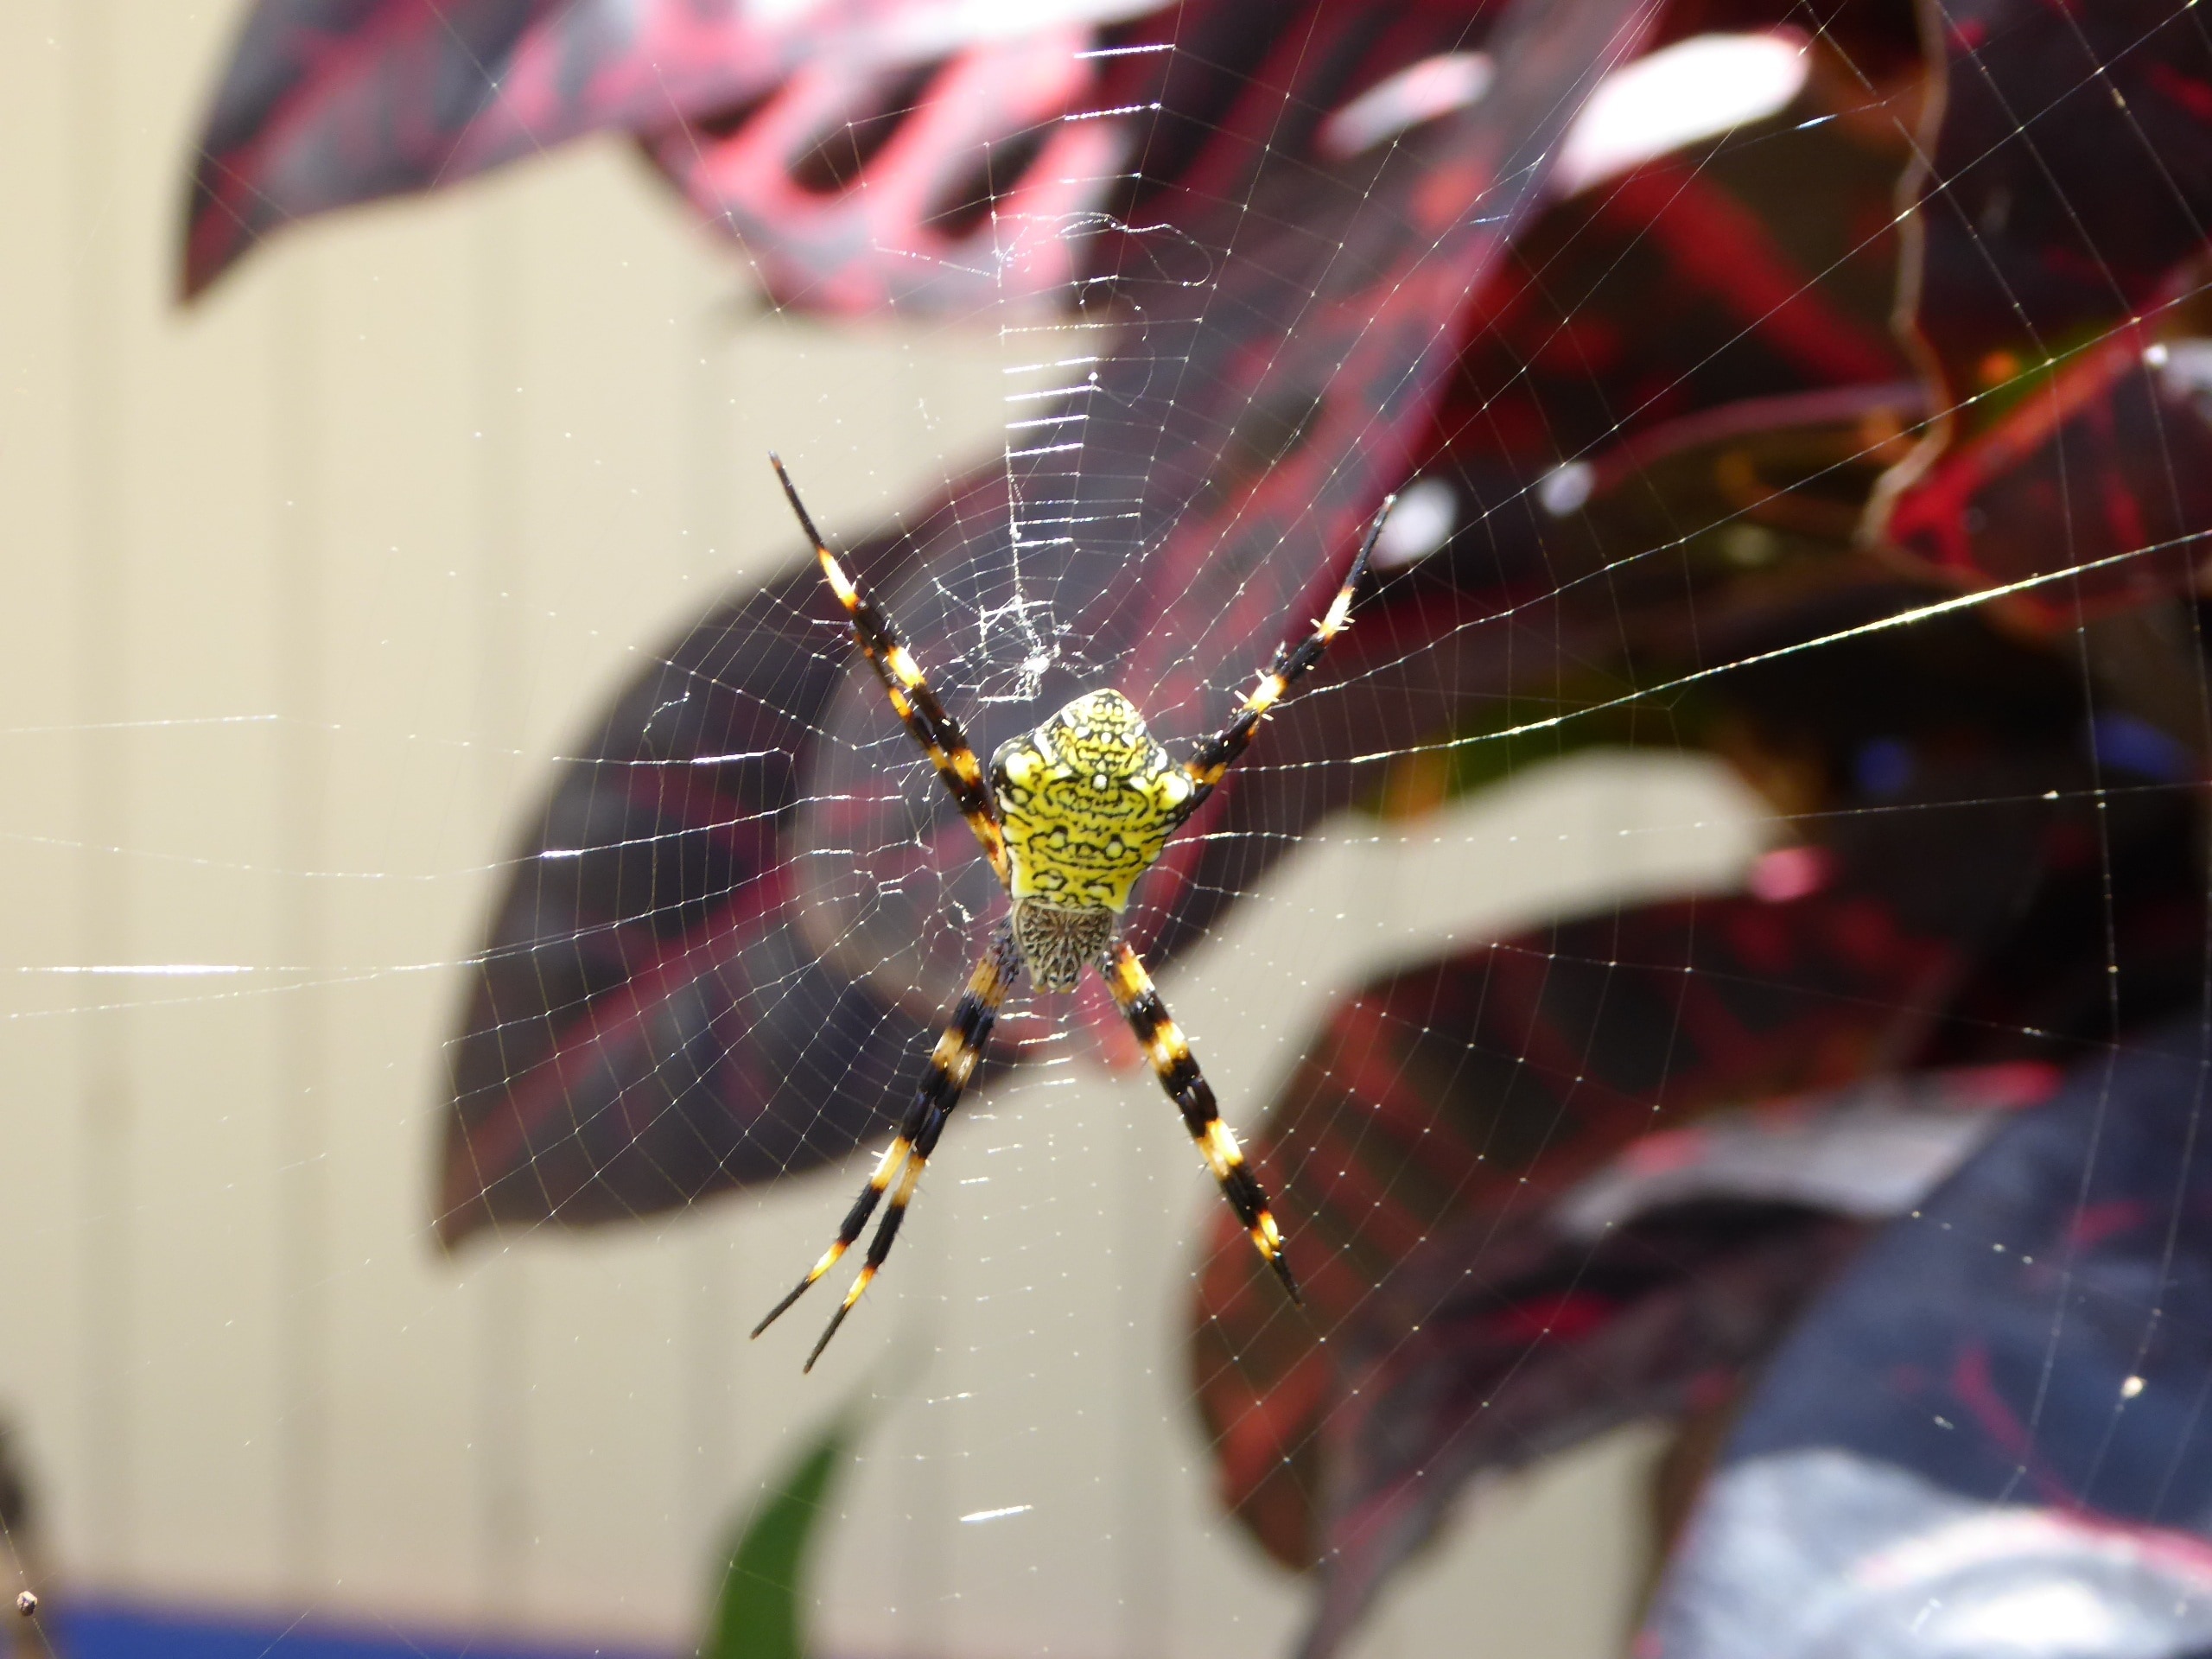 black and yellow 4-legged spider on web